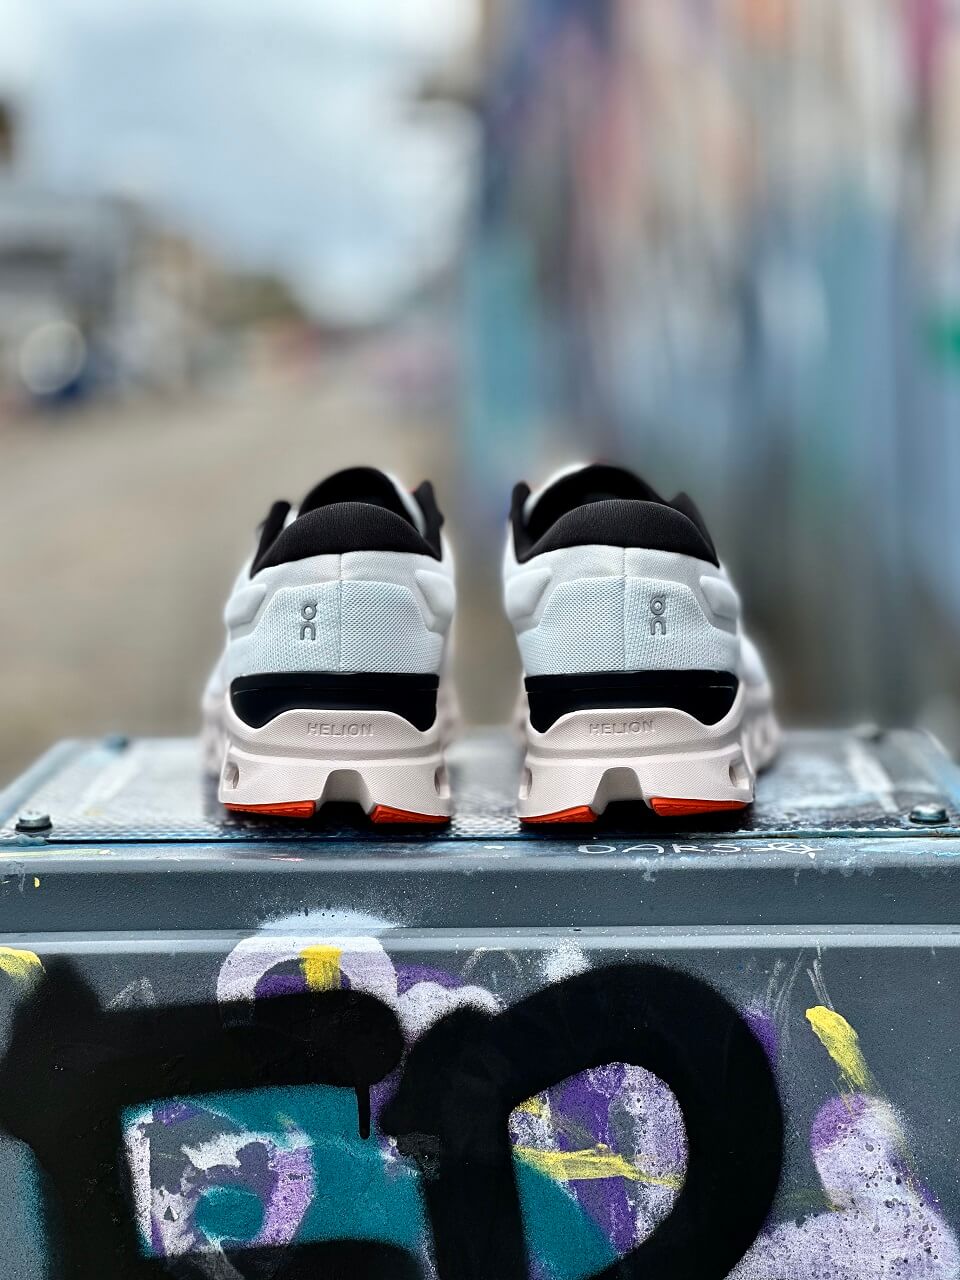 Heel view of On Cloudstratus 3 running shoes perched atop electric box in street